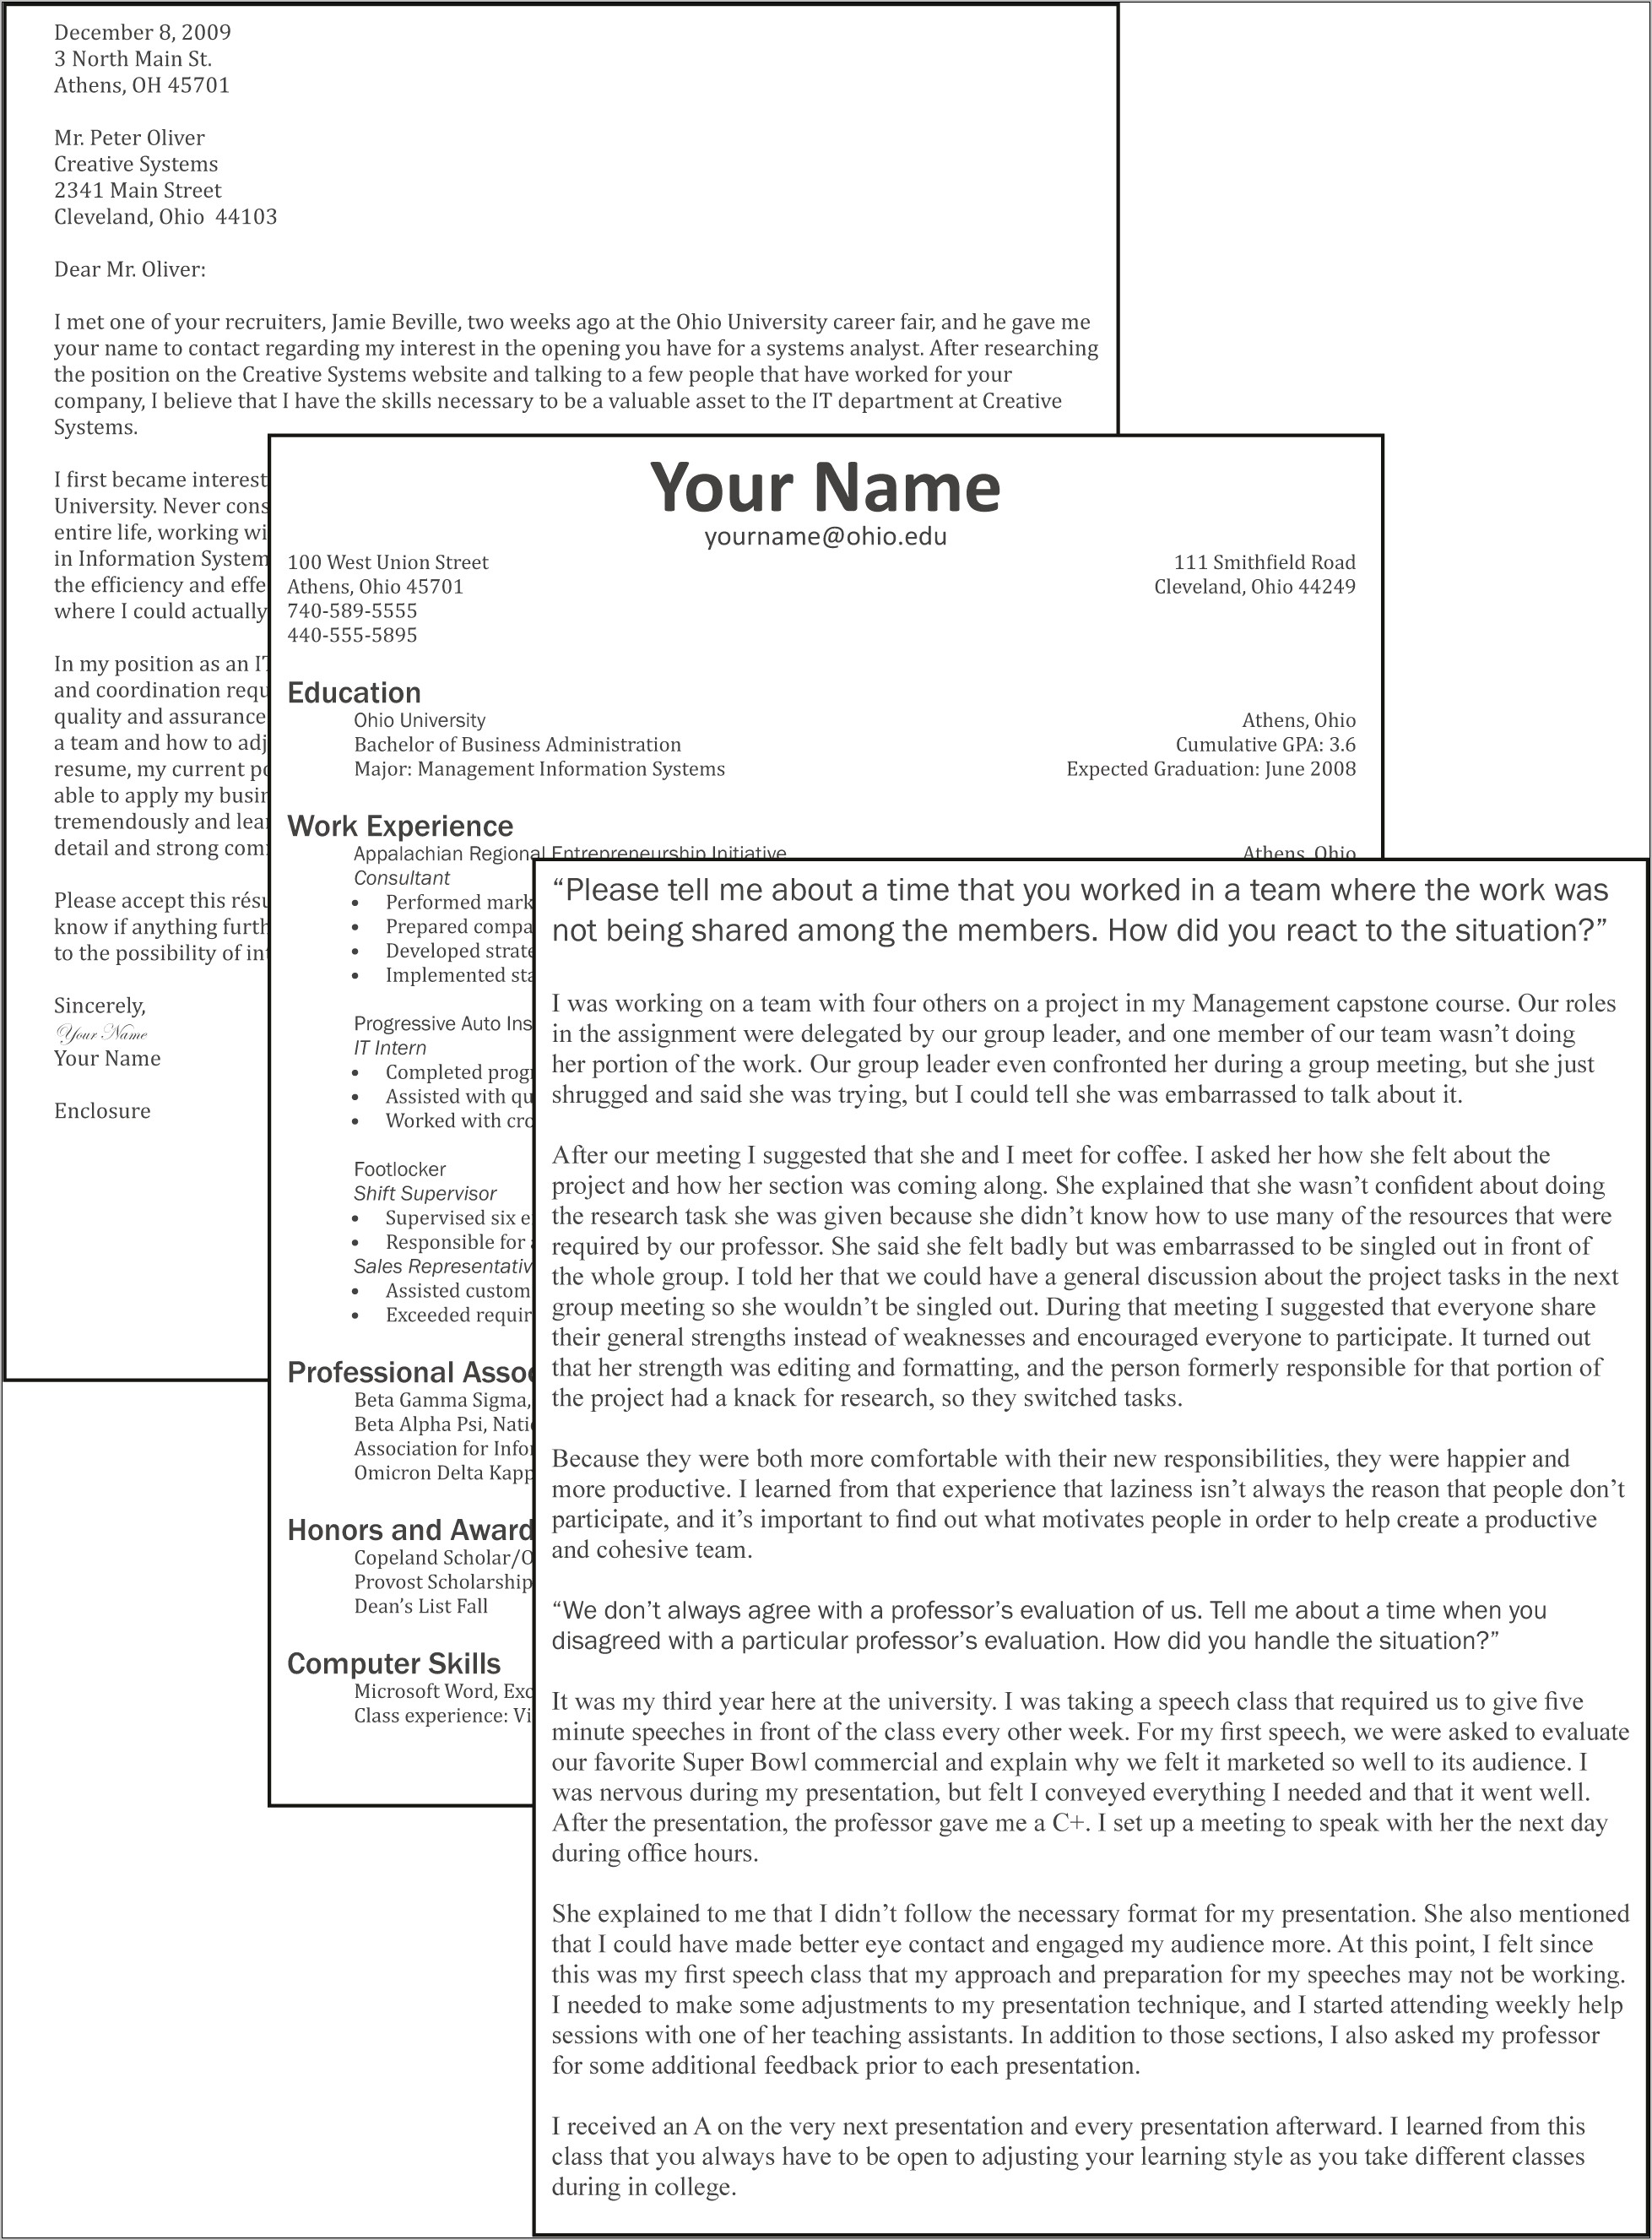 Resume Cover Letter And Assessment Table